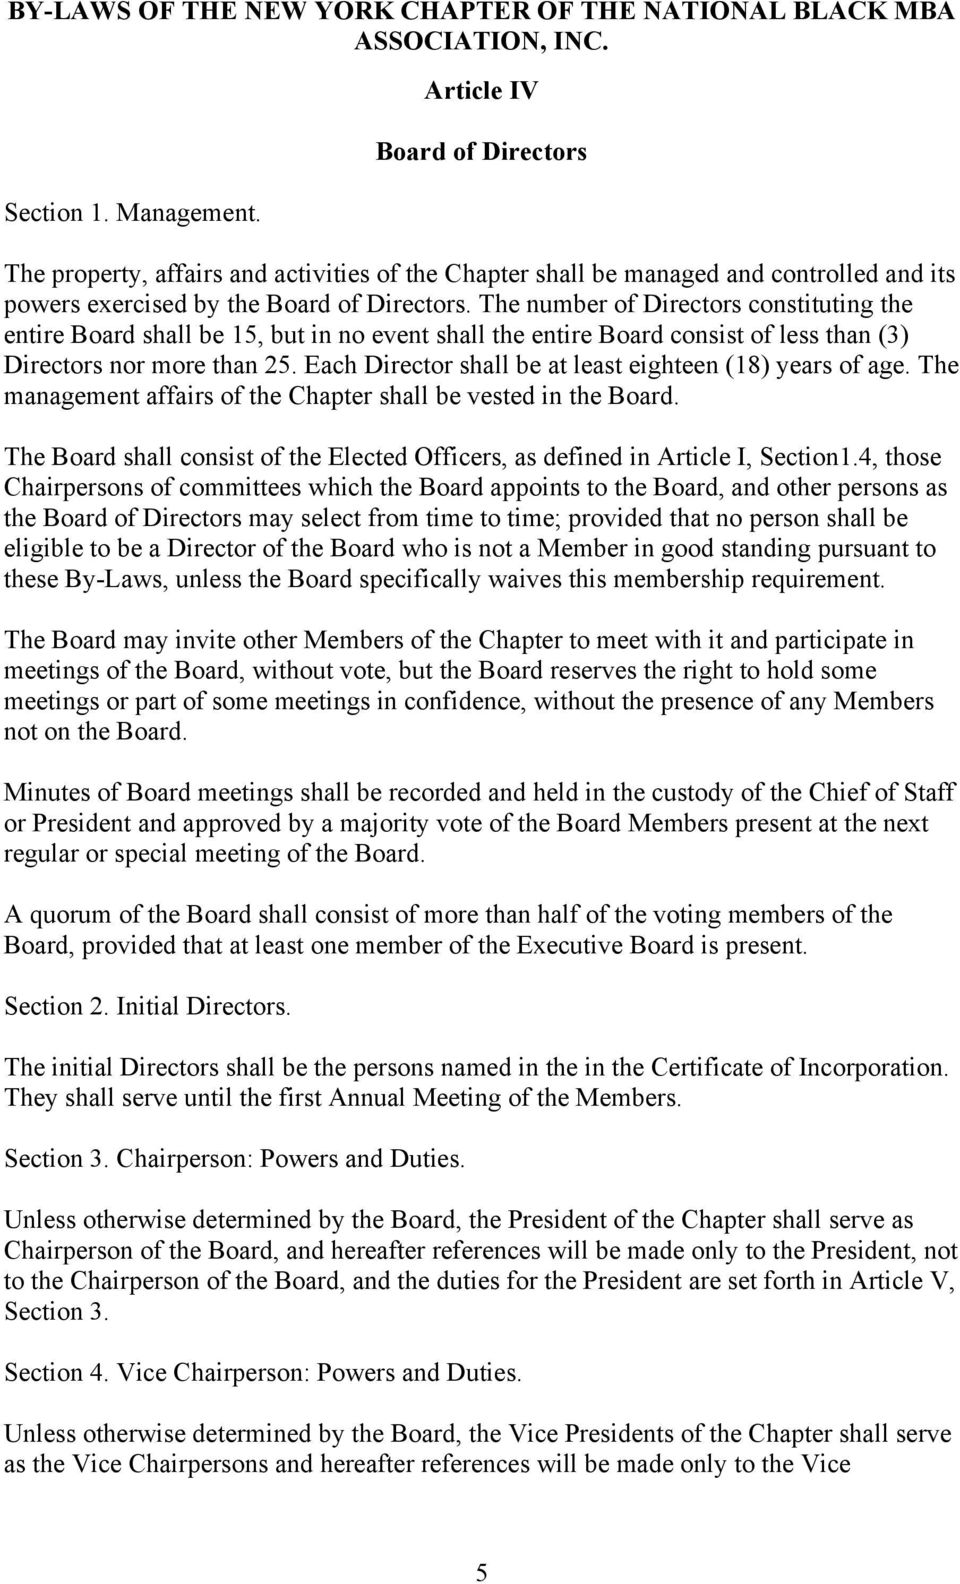 Each Director shall be at least eighteen (18) years of age. The management affairs of the Chapter shall be vested in the Board.